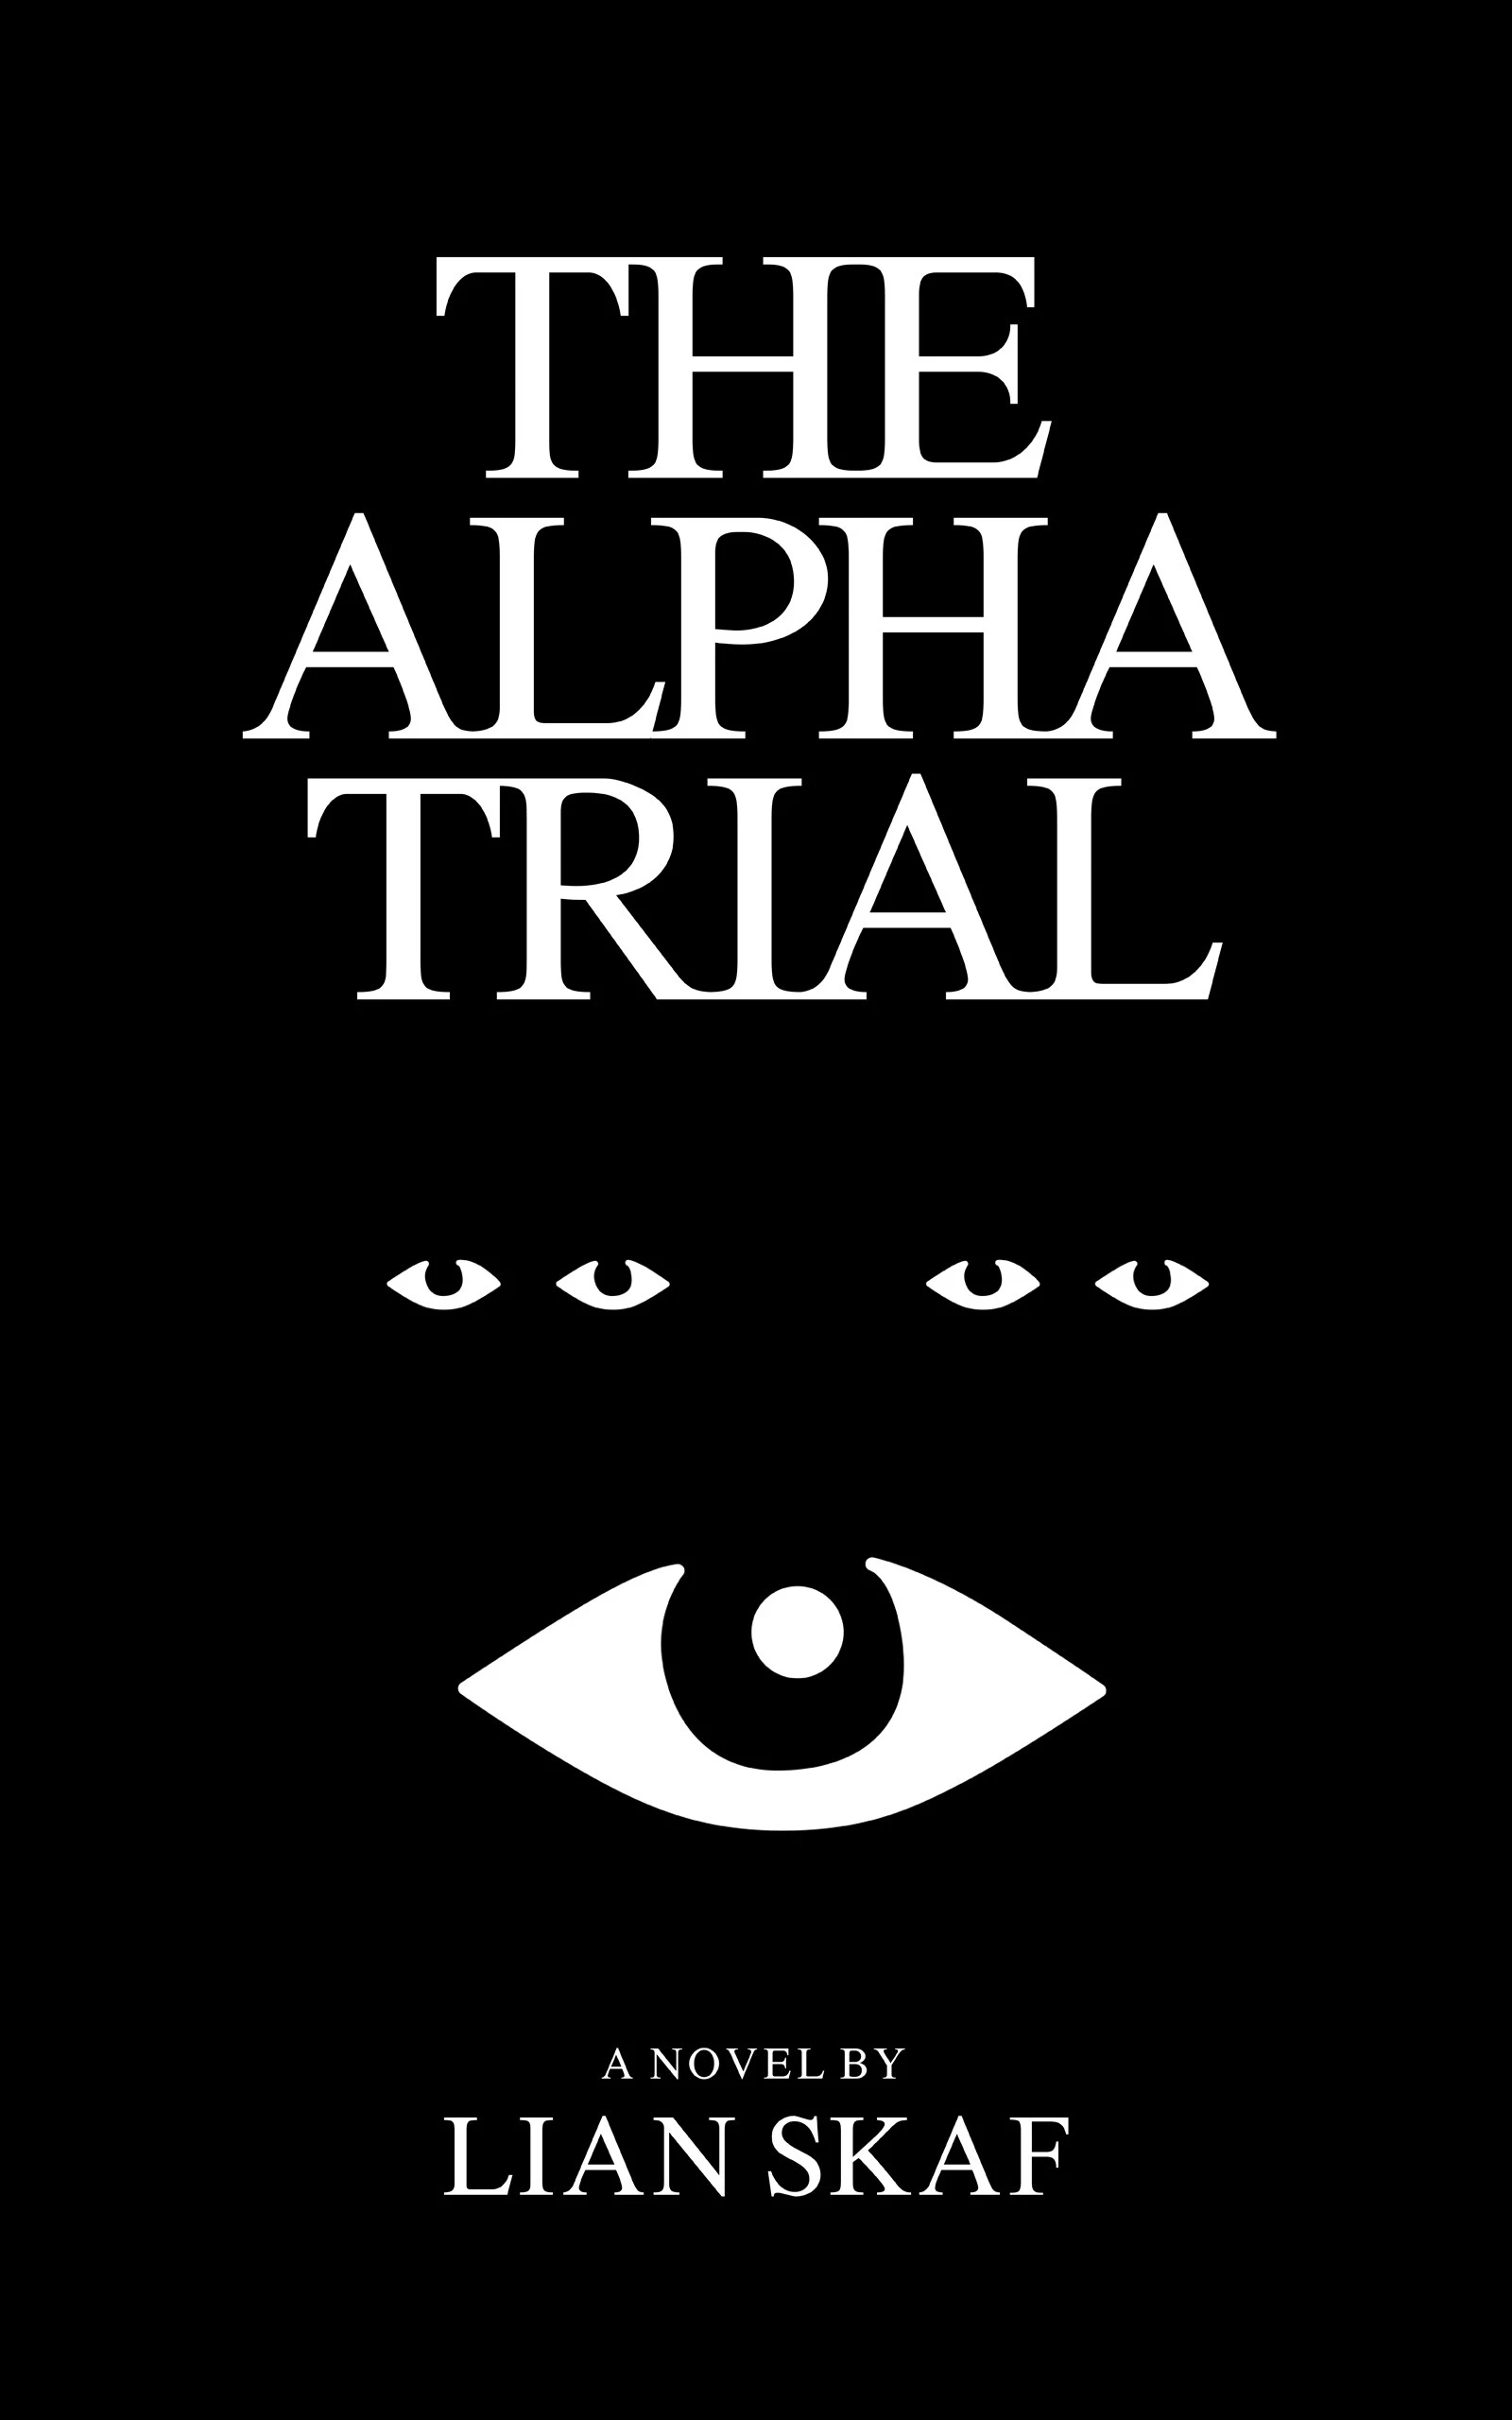 The ALPHA Trial